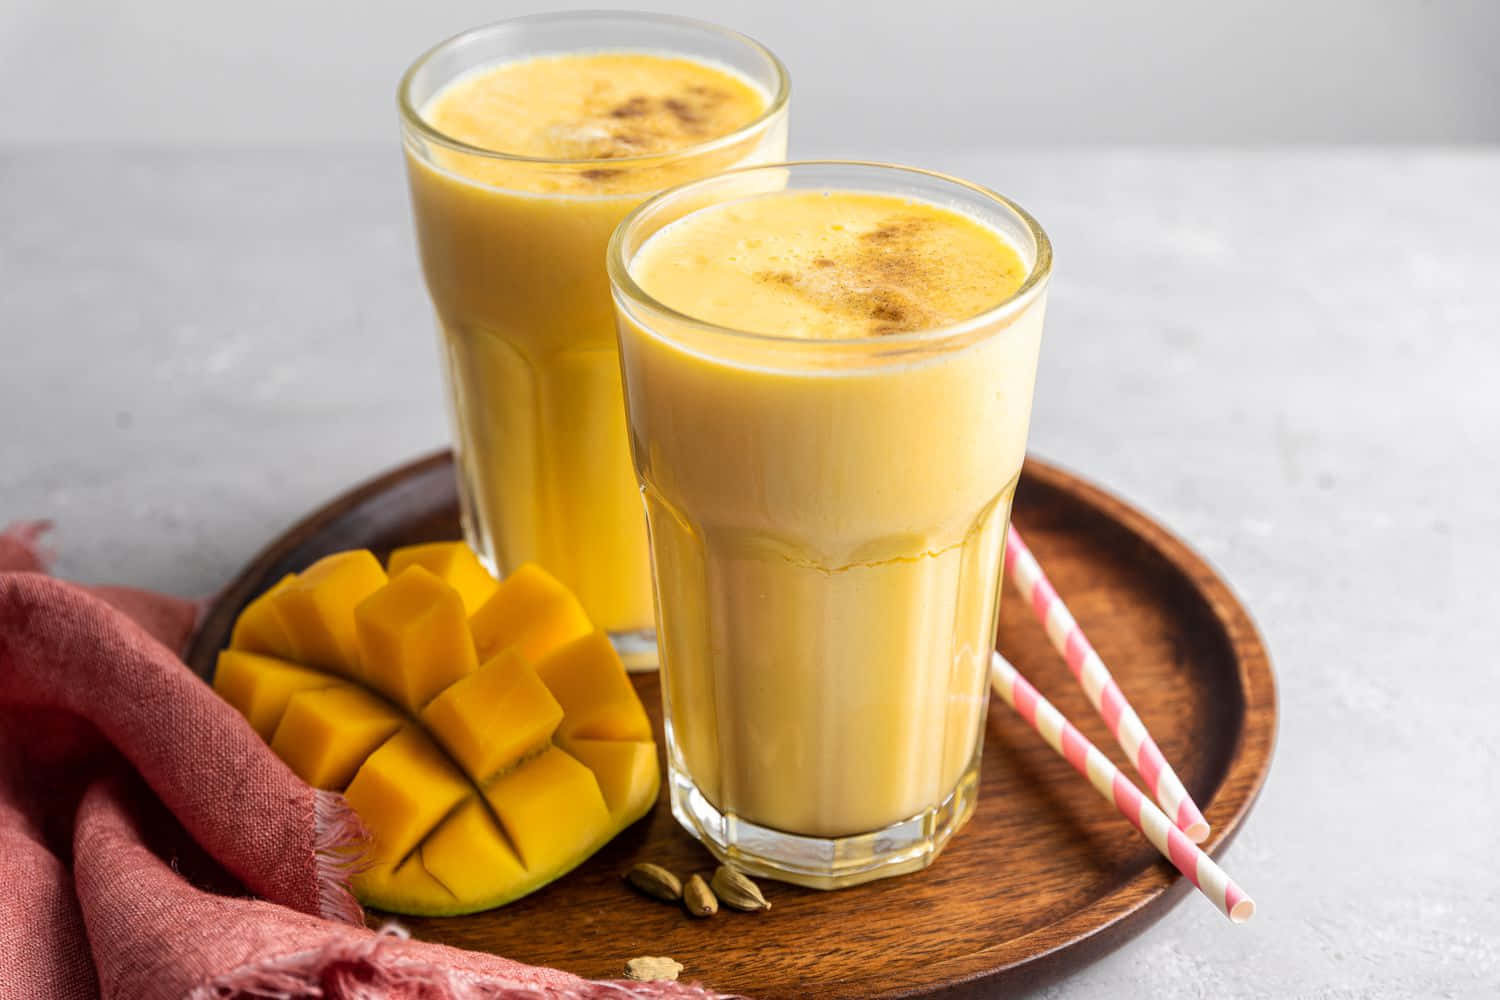 Take a bite of the exotic and sweet mango!